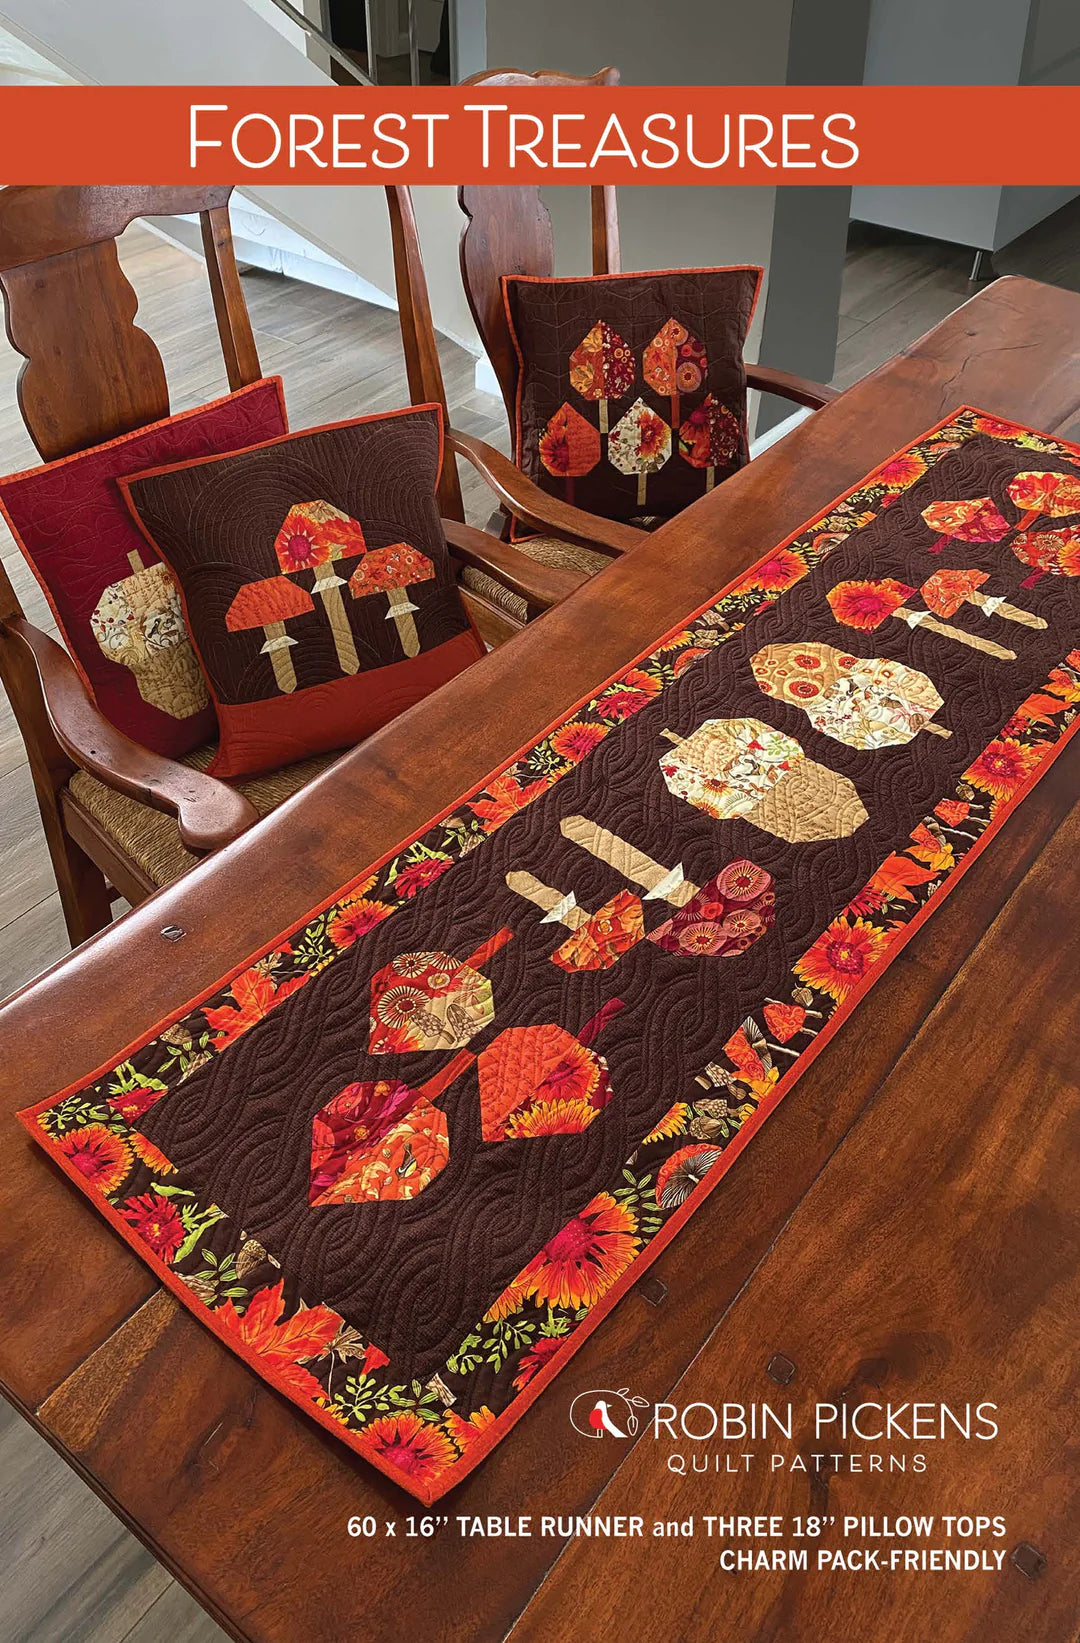 Forest Treasures Table Runner and Pillow Top Pattern by Robin Pickens - RPQP-FT152